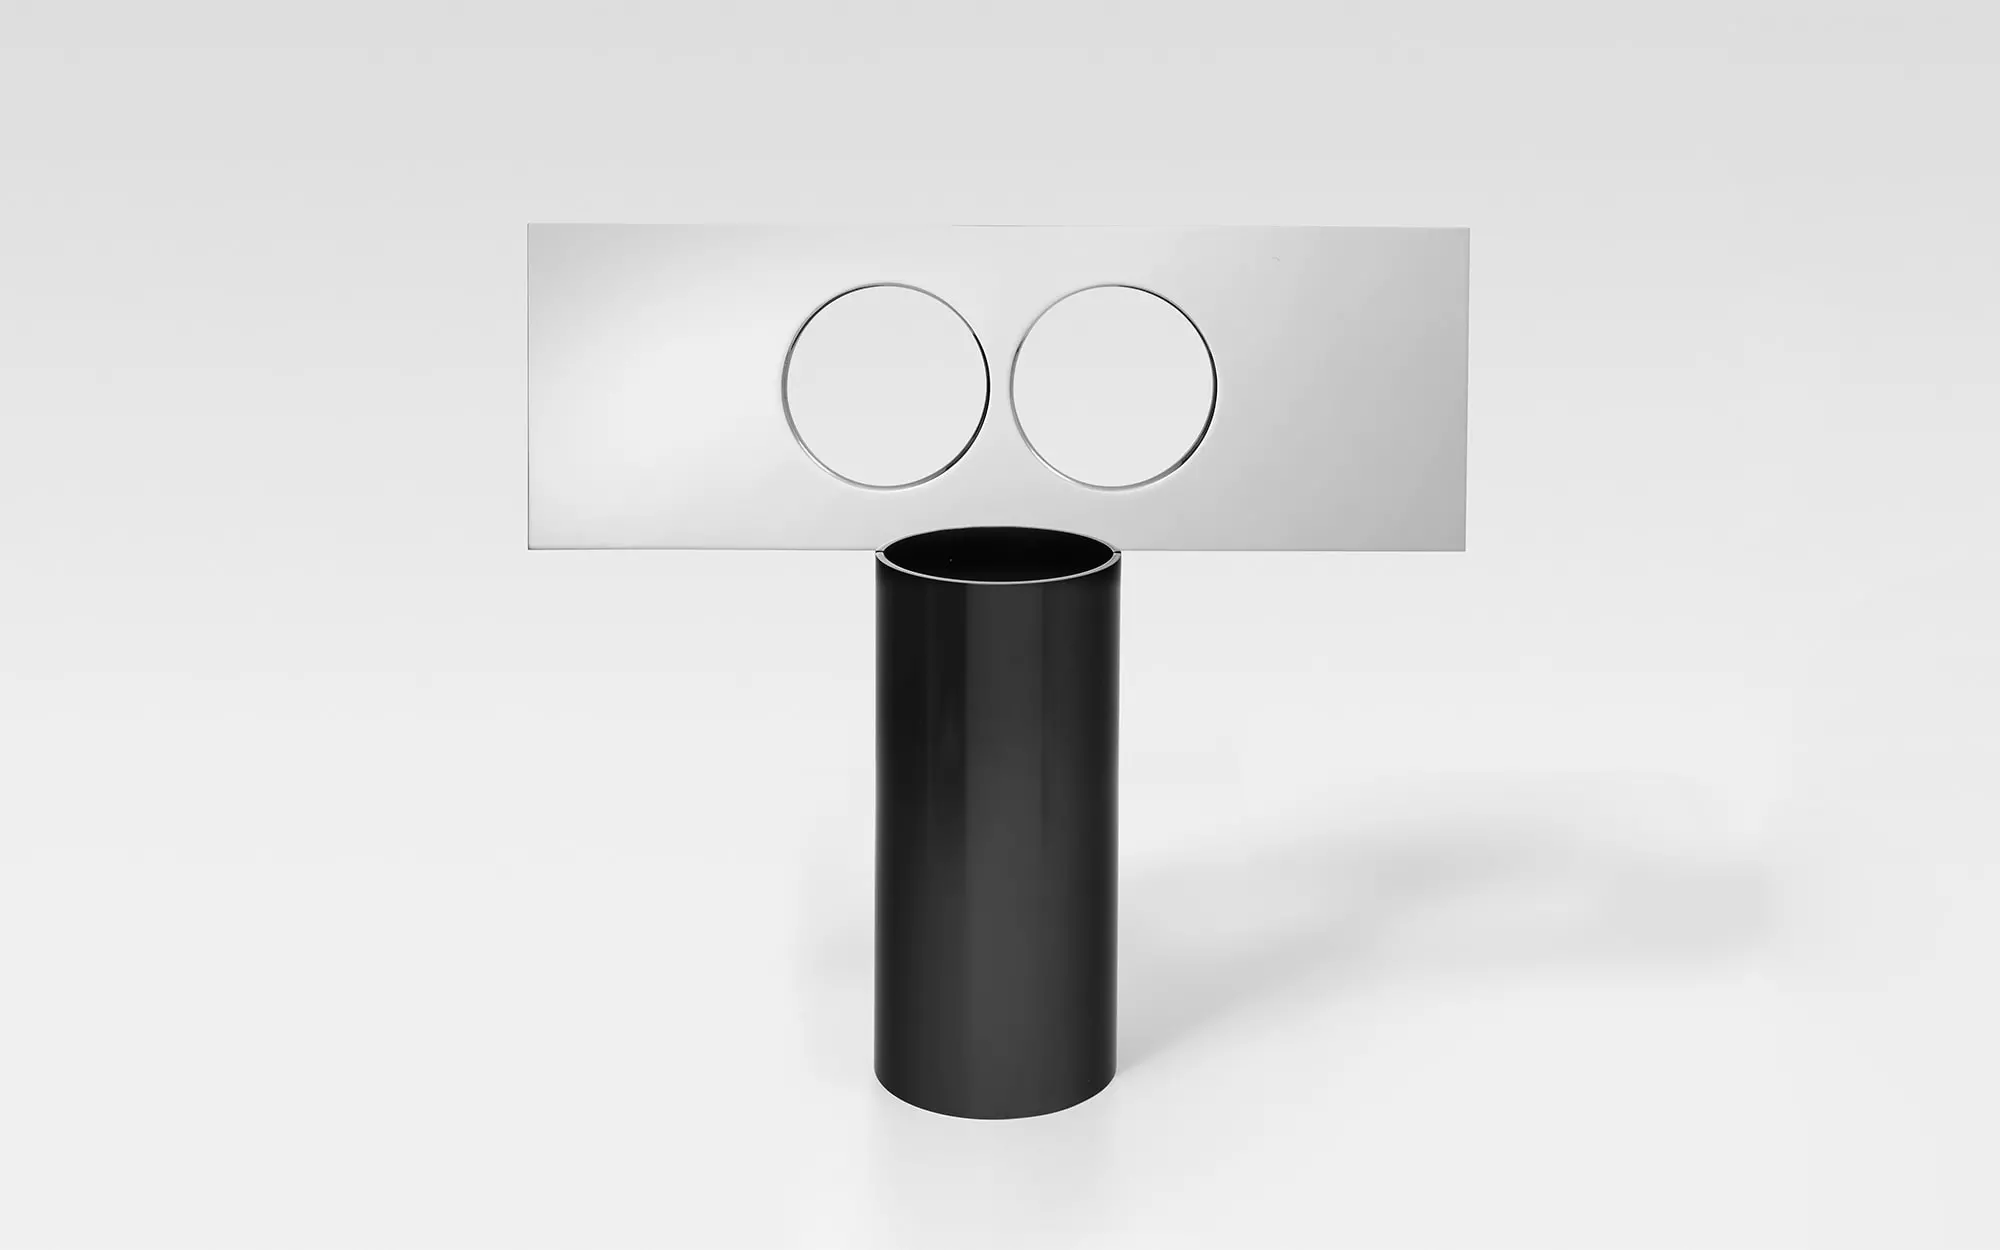 Lunettes - 2 Vase - Pierre Charpin - Seating - Galerie kreo